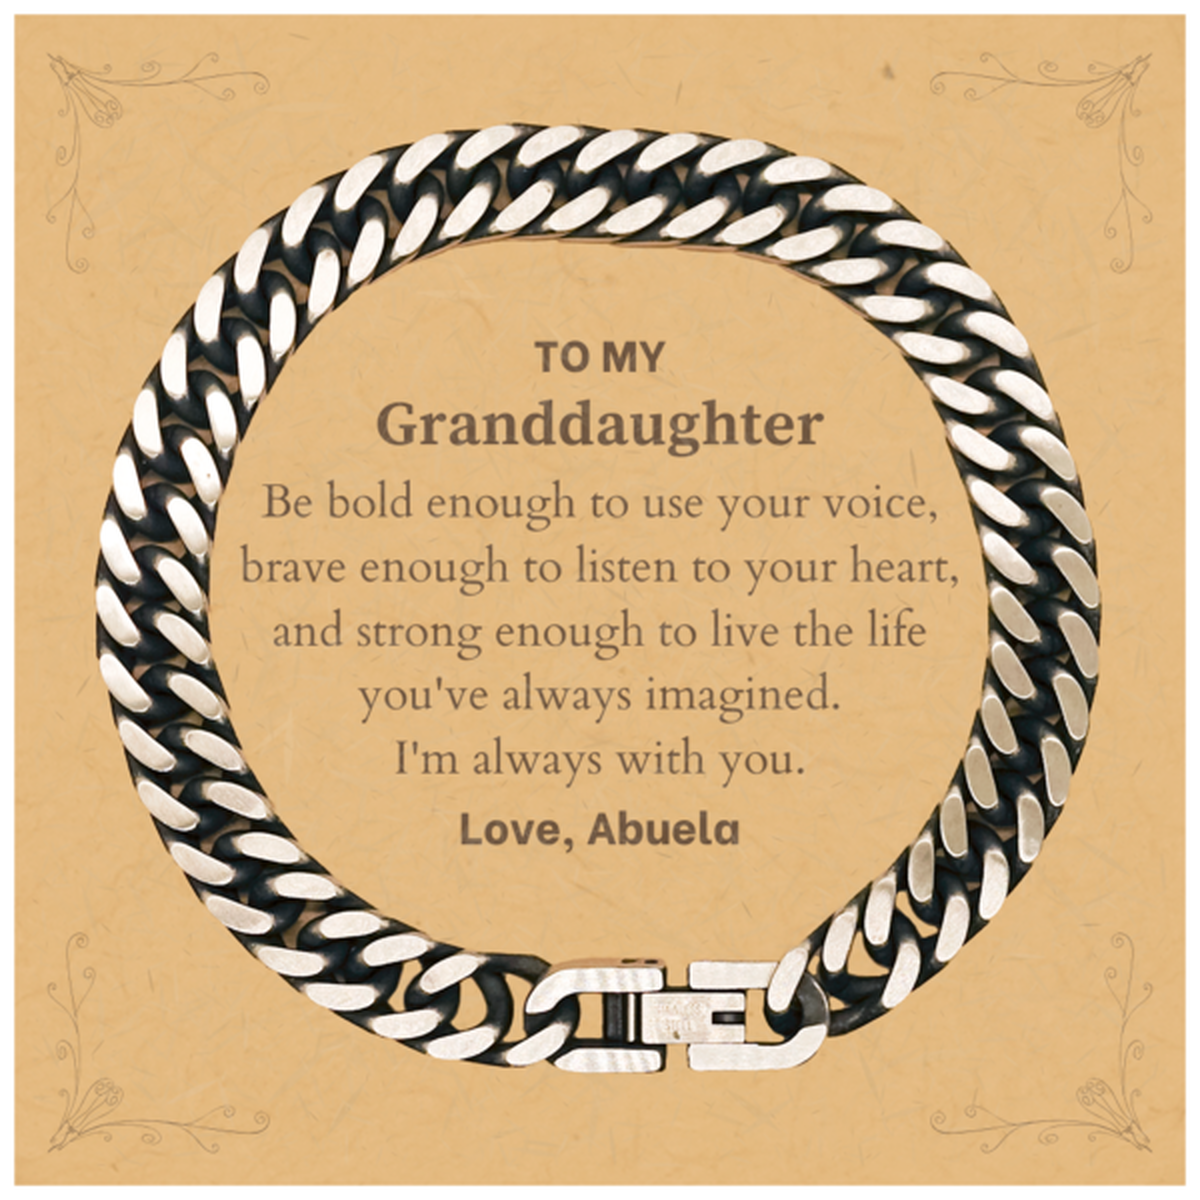 Keepsake Granddaughter Cuban Link Chain Bracelet Gift Idea Graduation Christmas Birthday Granddaughter from Abuela, Granddaughter Be bold enough to use your voice, brave enough to listen to your heart. Love, Abuela